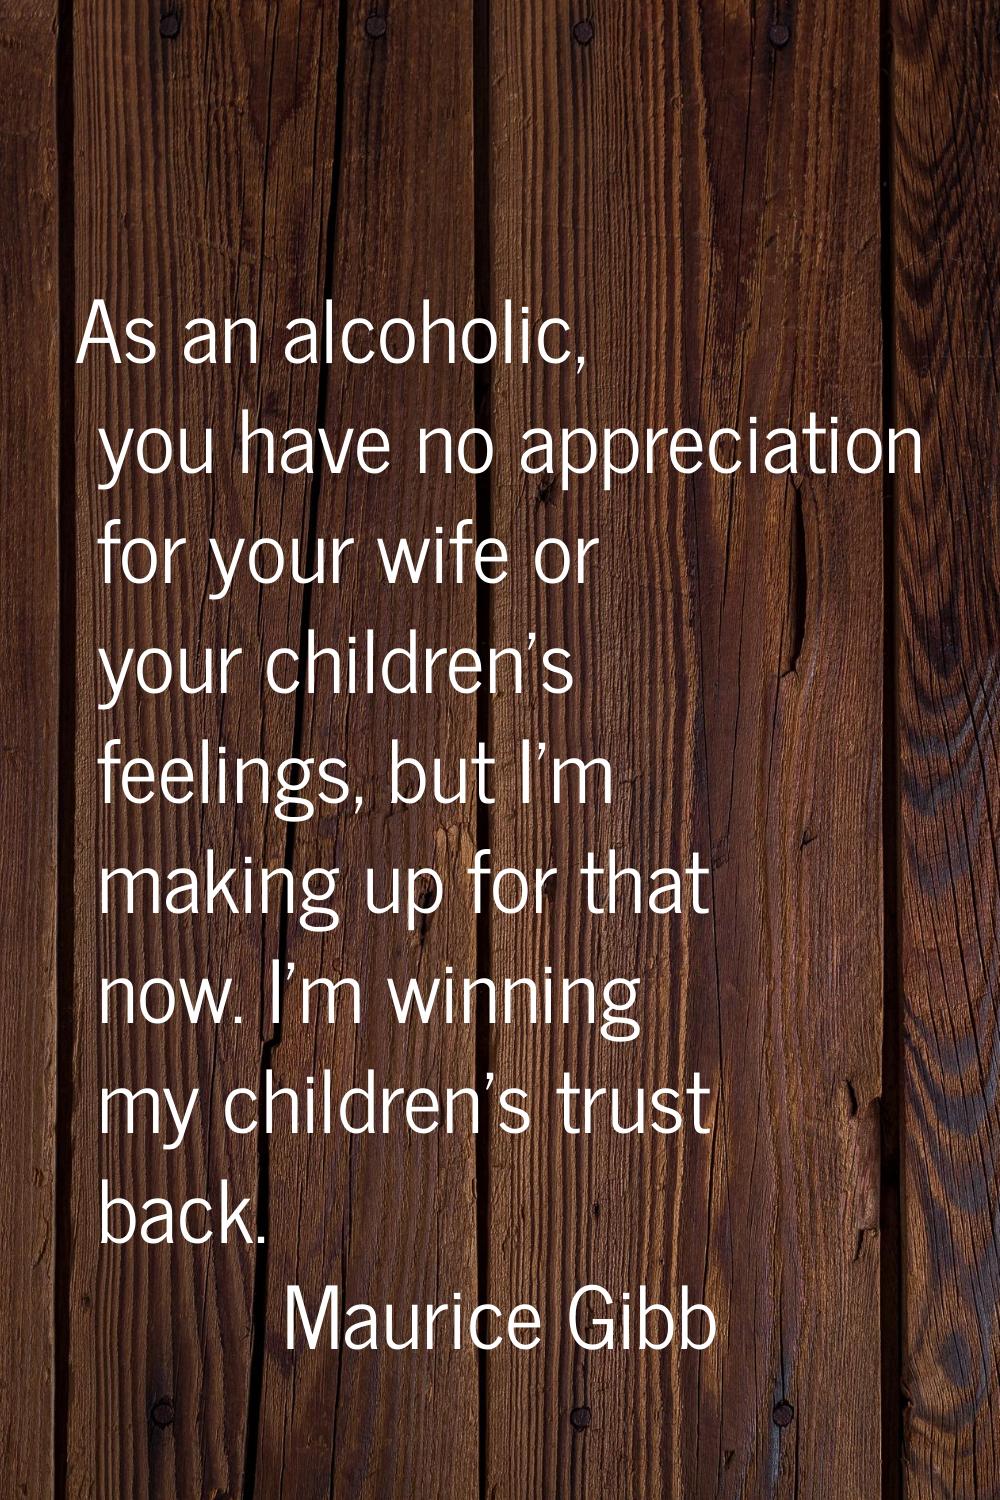 As an alcoholic, you have no appreciation for your wife or your children's feelings, but I'm making